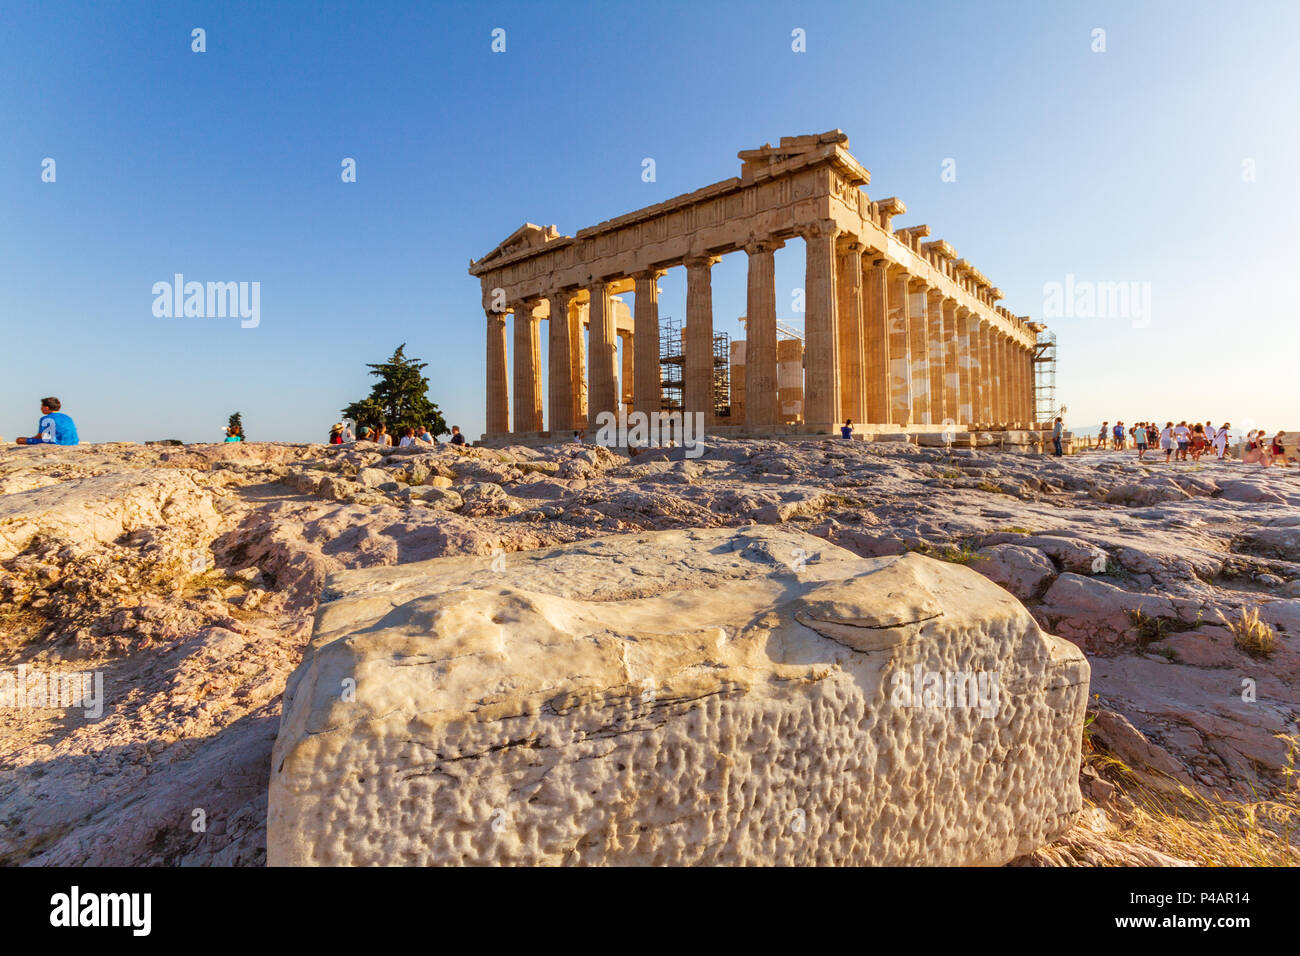 Athens, Greece - June 9, 2018: The Parthenon on the Acropolis of Athens surrounded by tourists on a summer afternoon Stock Photo